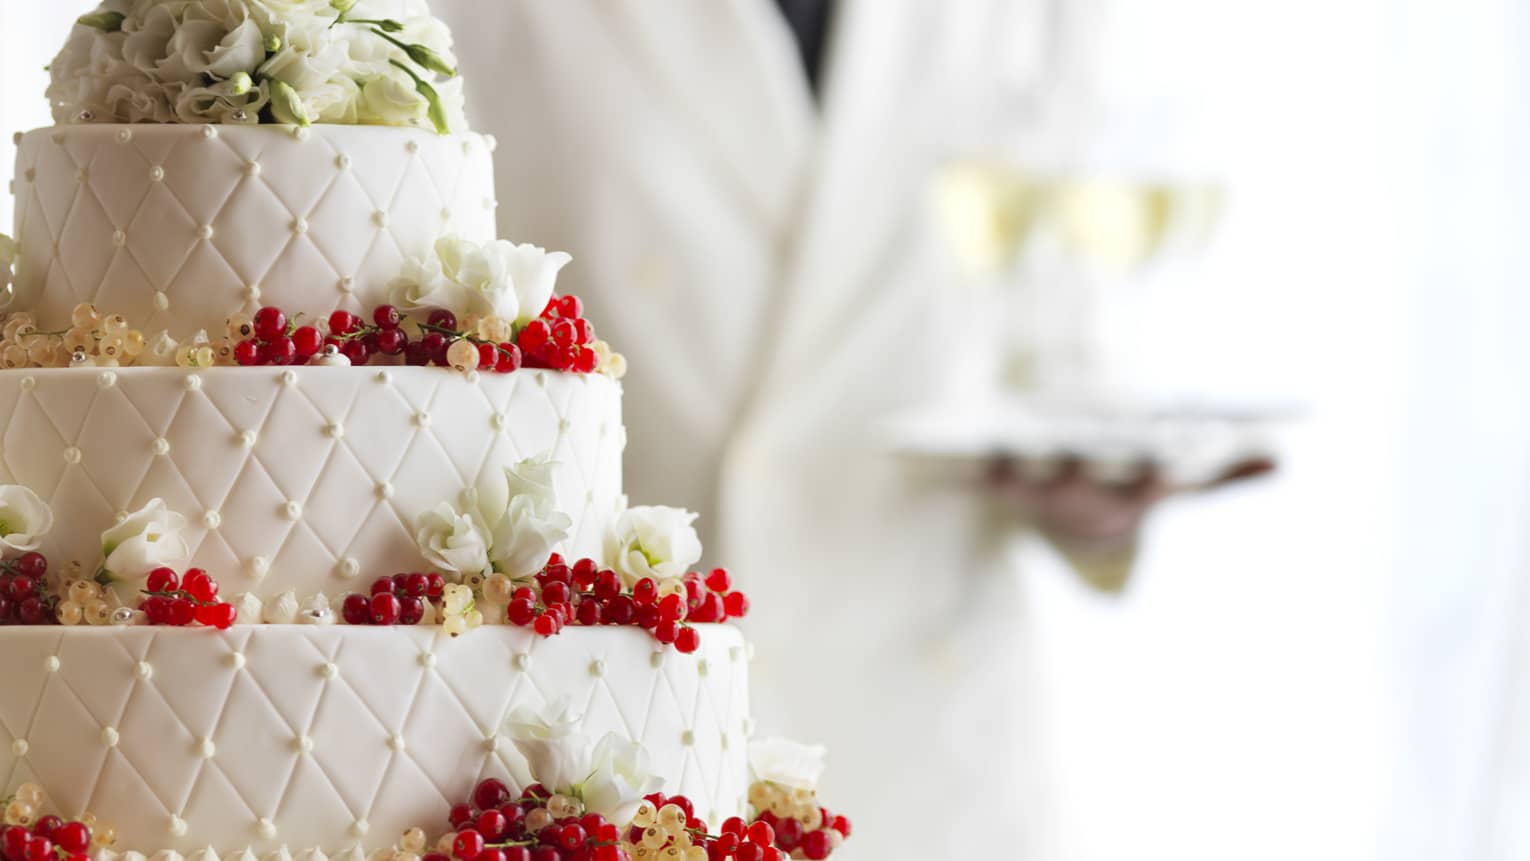 Waiter with tray of Champagne glasses behind white tiered wedding cake with flowers